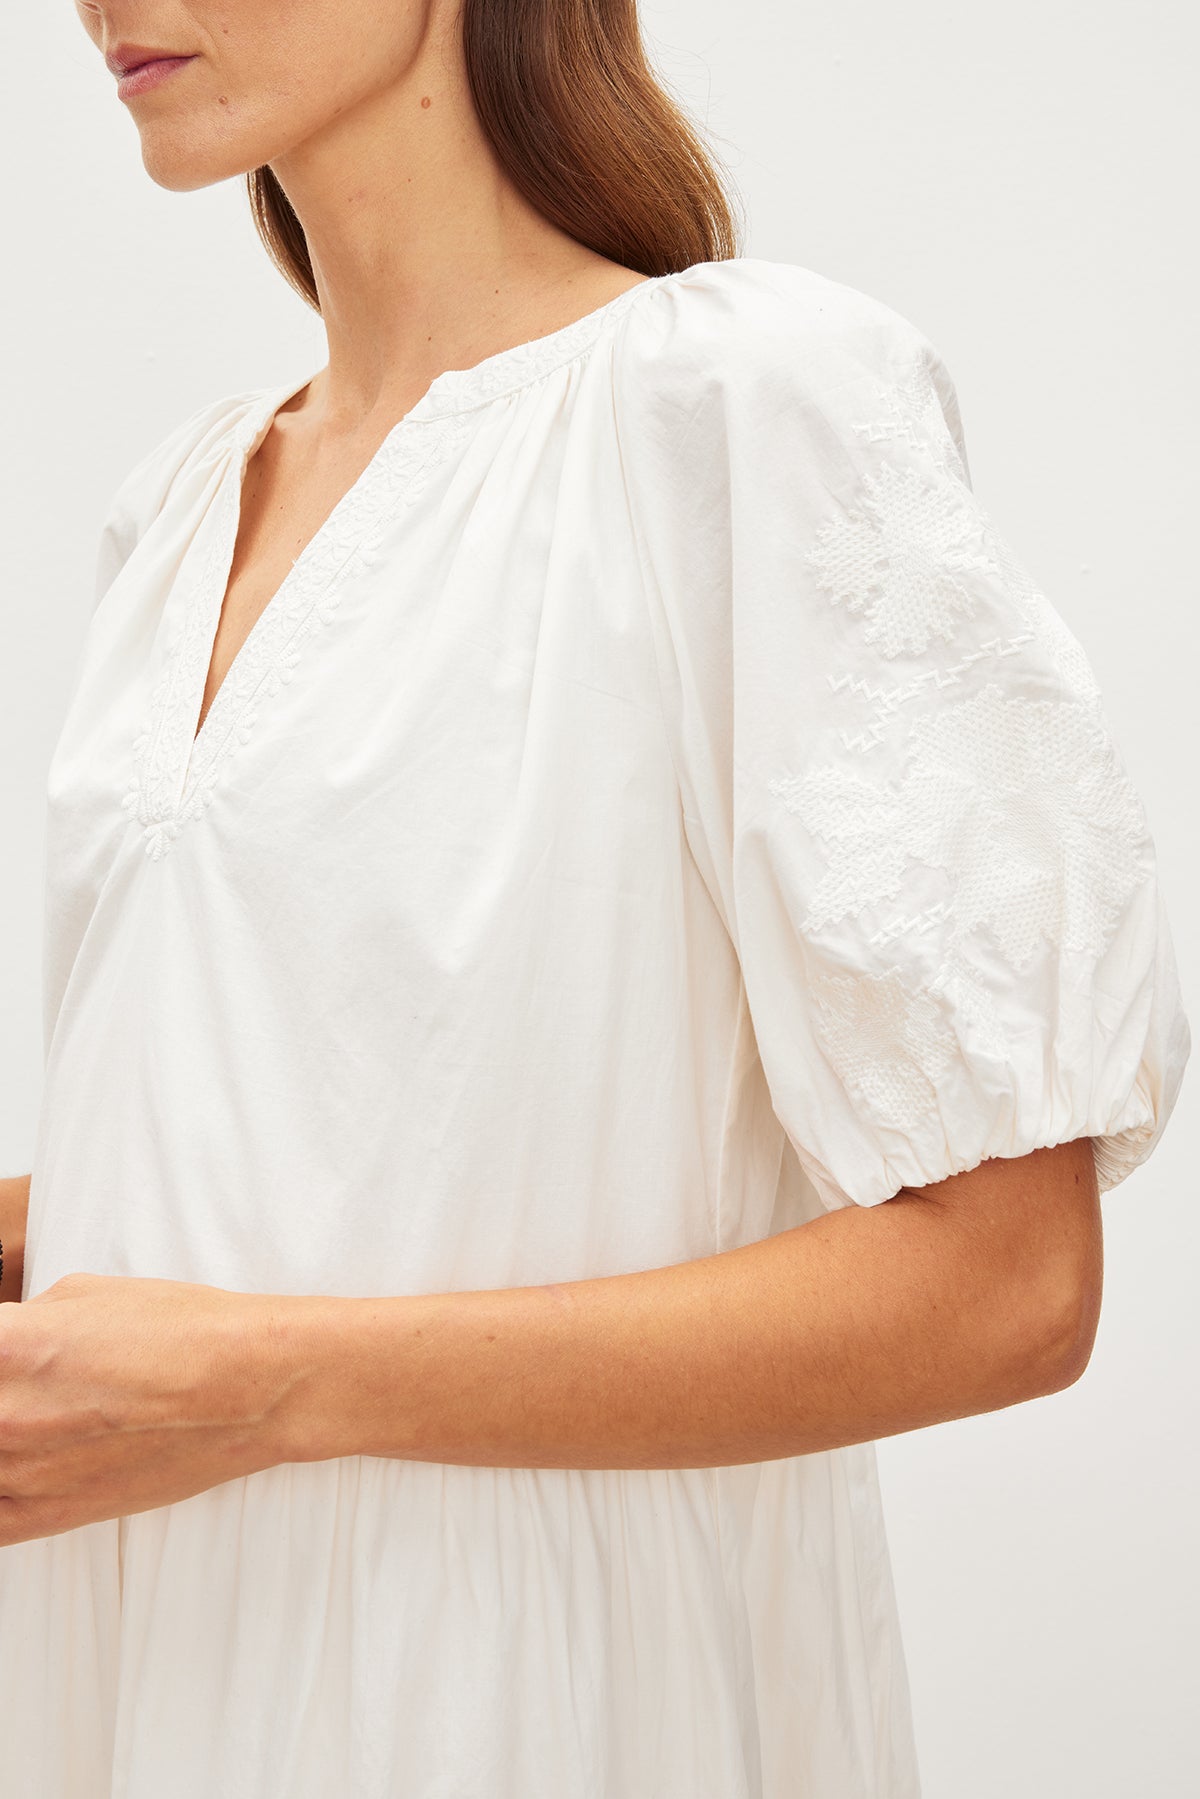 Close-up of a woman in a white cotton dress with floral embroidered puff sleeves, focusing on the shoulder and v-neckline details of the CHRISSY EMBROIDERED BOHO DRESS by Velvet by Graham & Spencer.-35955557597377